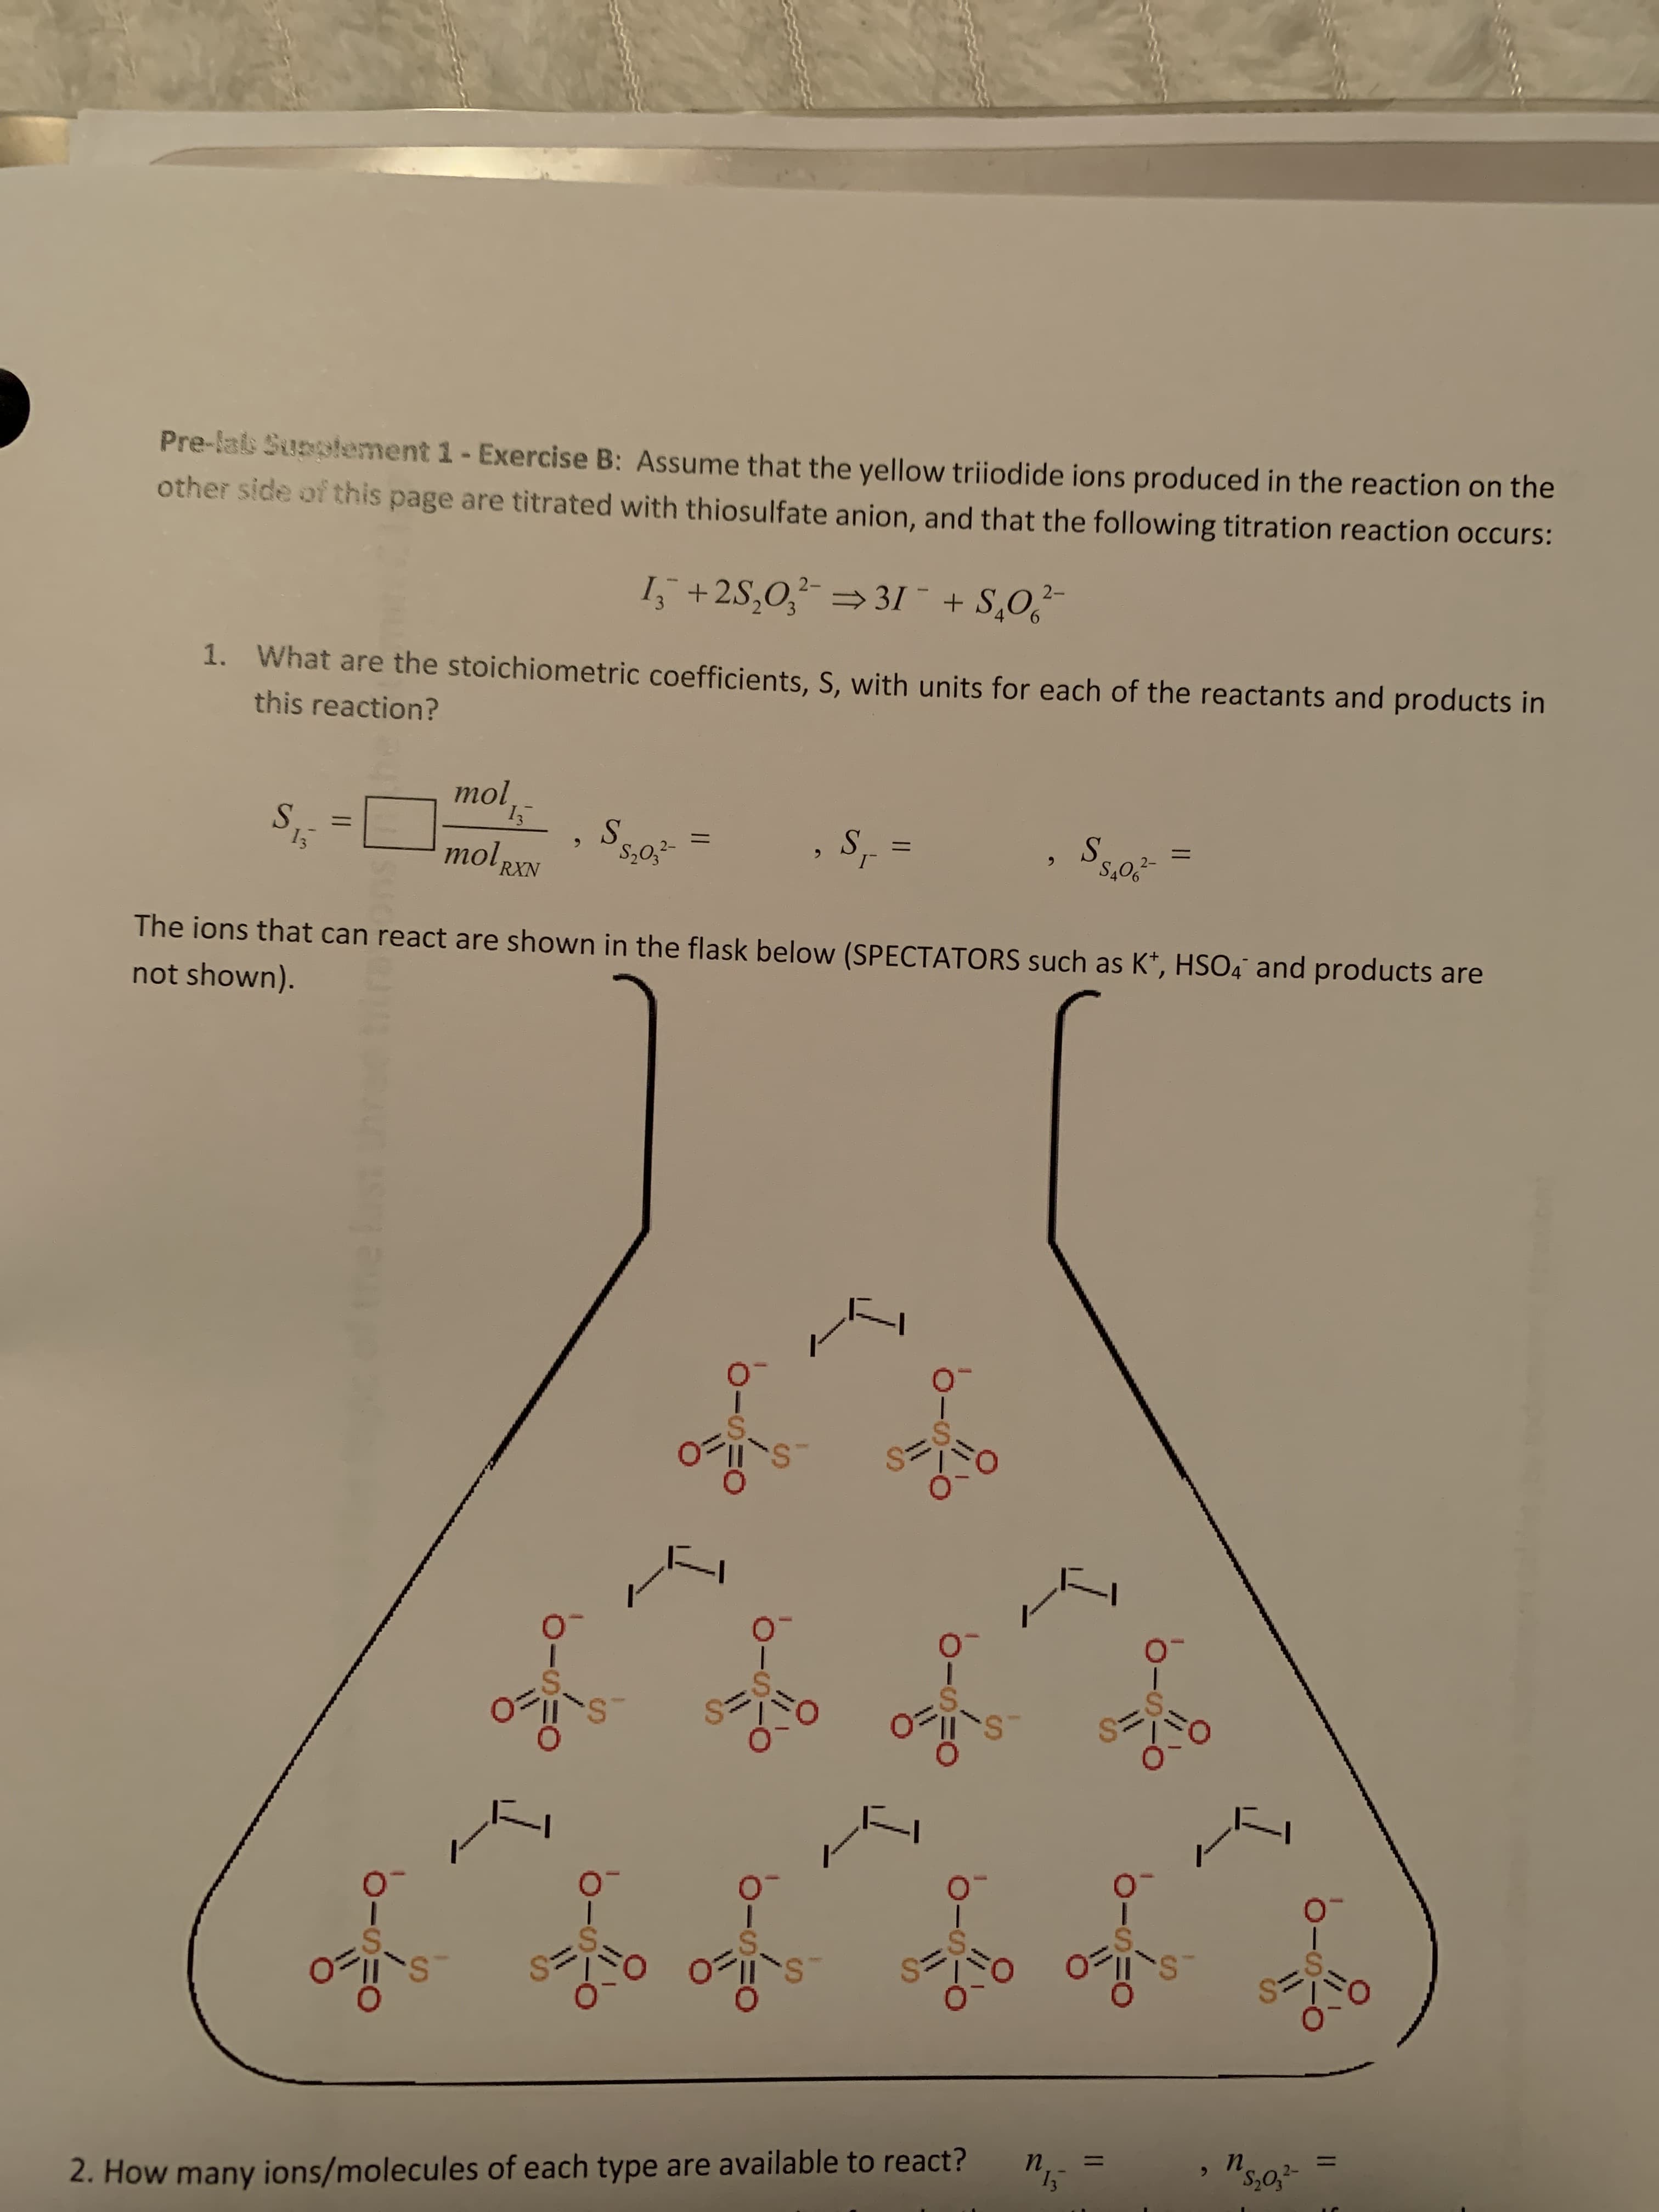 Pre-lals Supplement 1- Exercise B: Assume that the yellow triiodide ions produced in the reaction on the
other side of this page are titrated with thiosulfate anion, and that the following titration reaction occurs:
I, +2S,0, 31¯ + S,O,-
1. What are the stoichiometric coefficients, S, with units for each of the reactants and products in
9.
this reaction?
mol 15
S.
%3D
13
S.
S,0,2-
mol RXN
6.
S.
%3D
S.
S40,2-
6.
The ions that can react are shown in the flask below (SPECTATORS such as K*, HSO4° and products are
not shown).
wwww
wwwwr
%3D
%3=
2. How many ions/molecules of each type are available to react?
п.
п.
wwwwwe
%24
